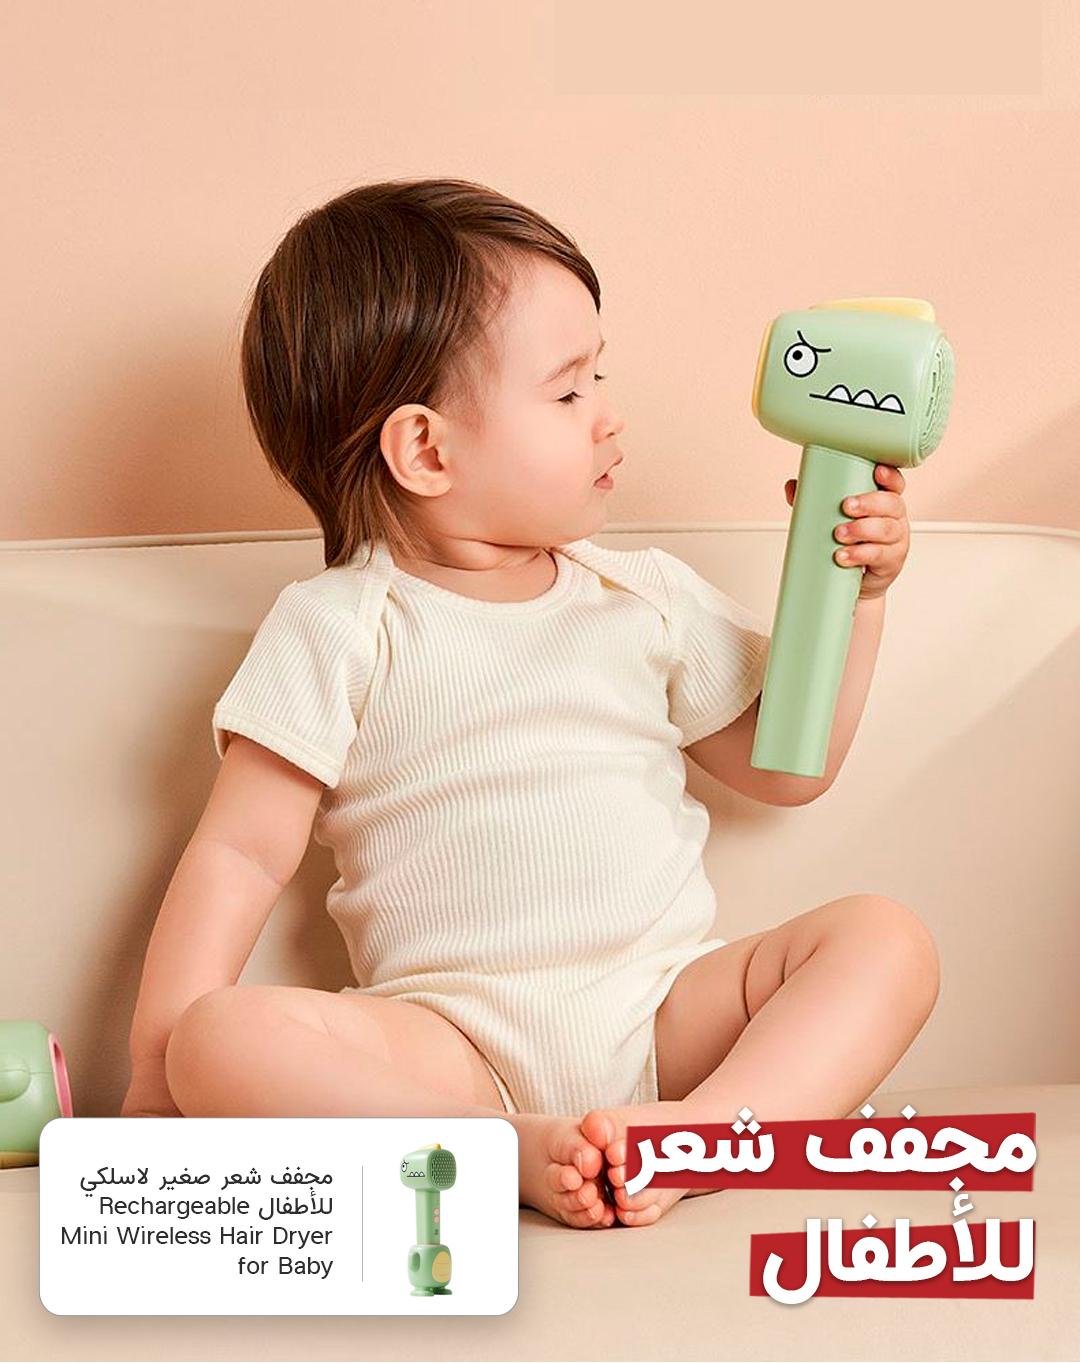 Rechargeable Mini Wireless Hair Dryer for Baby